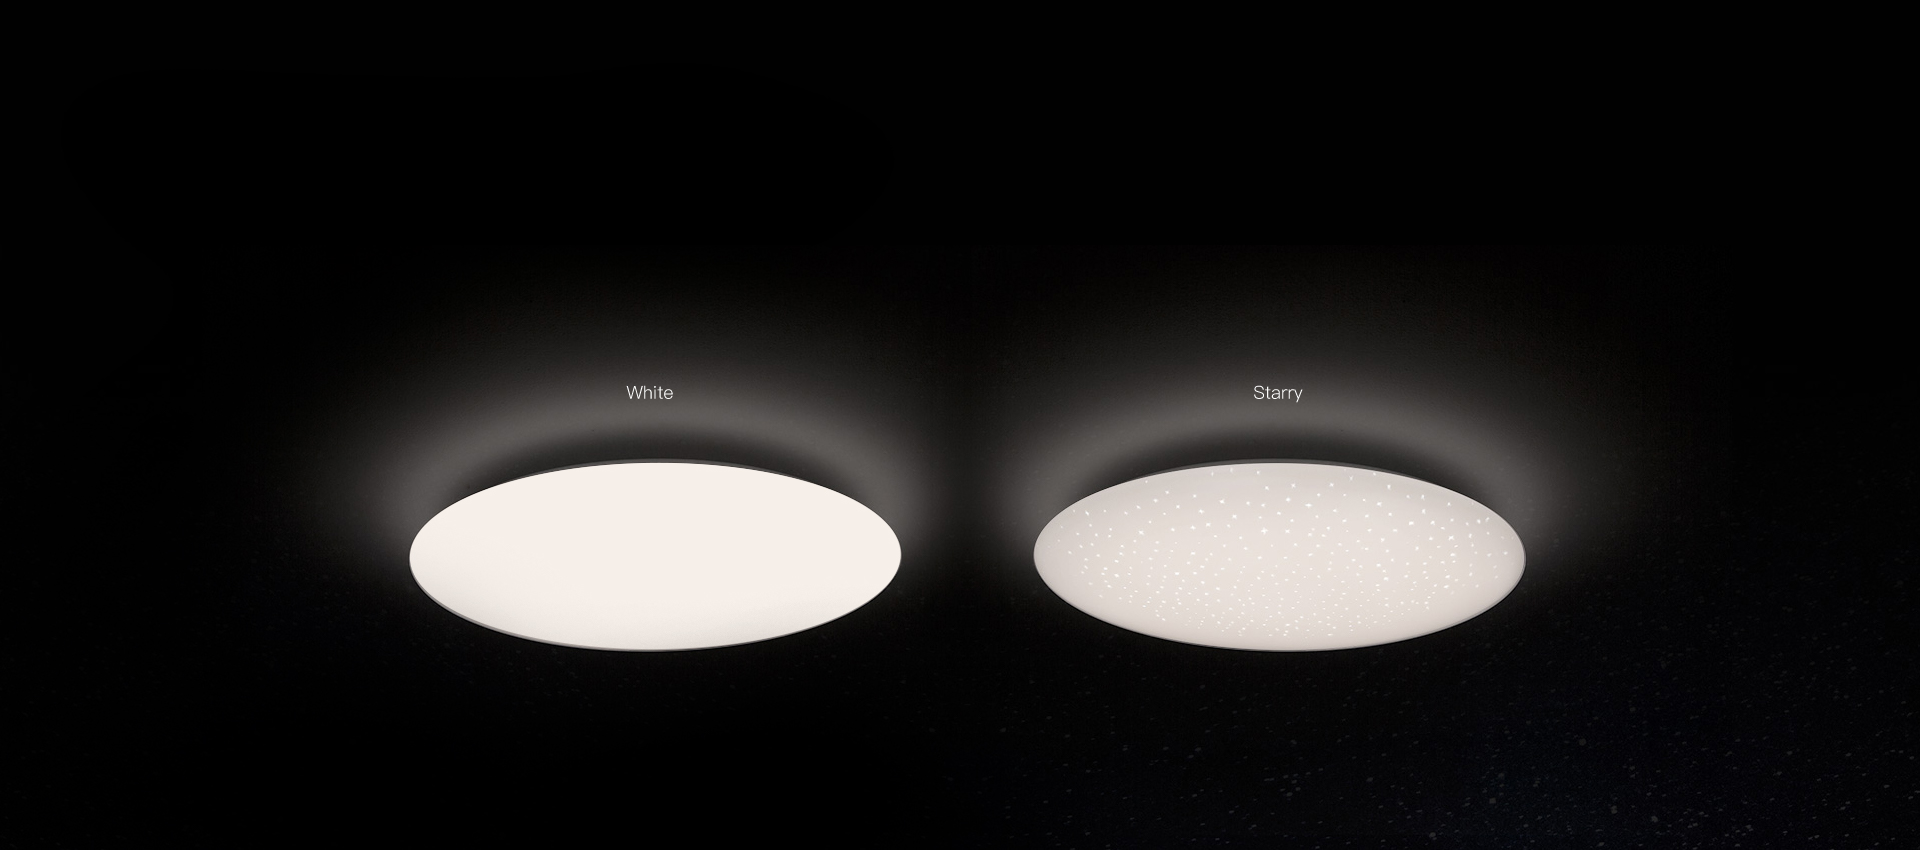 Versatile design to meet home of any style » Galaxy LED Ceiling Light